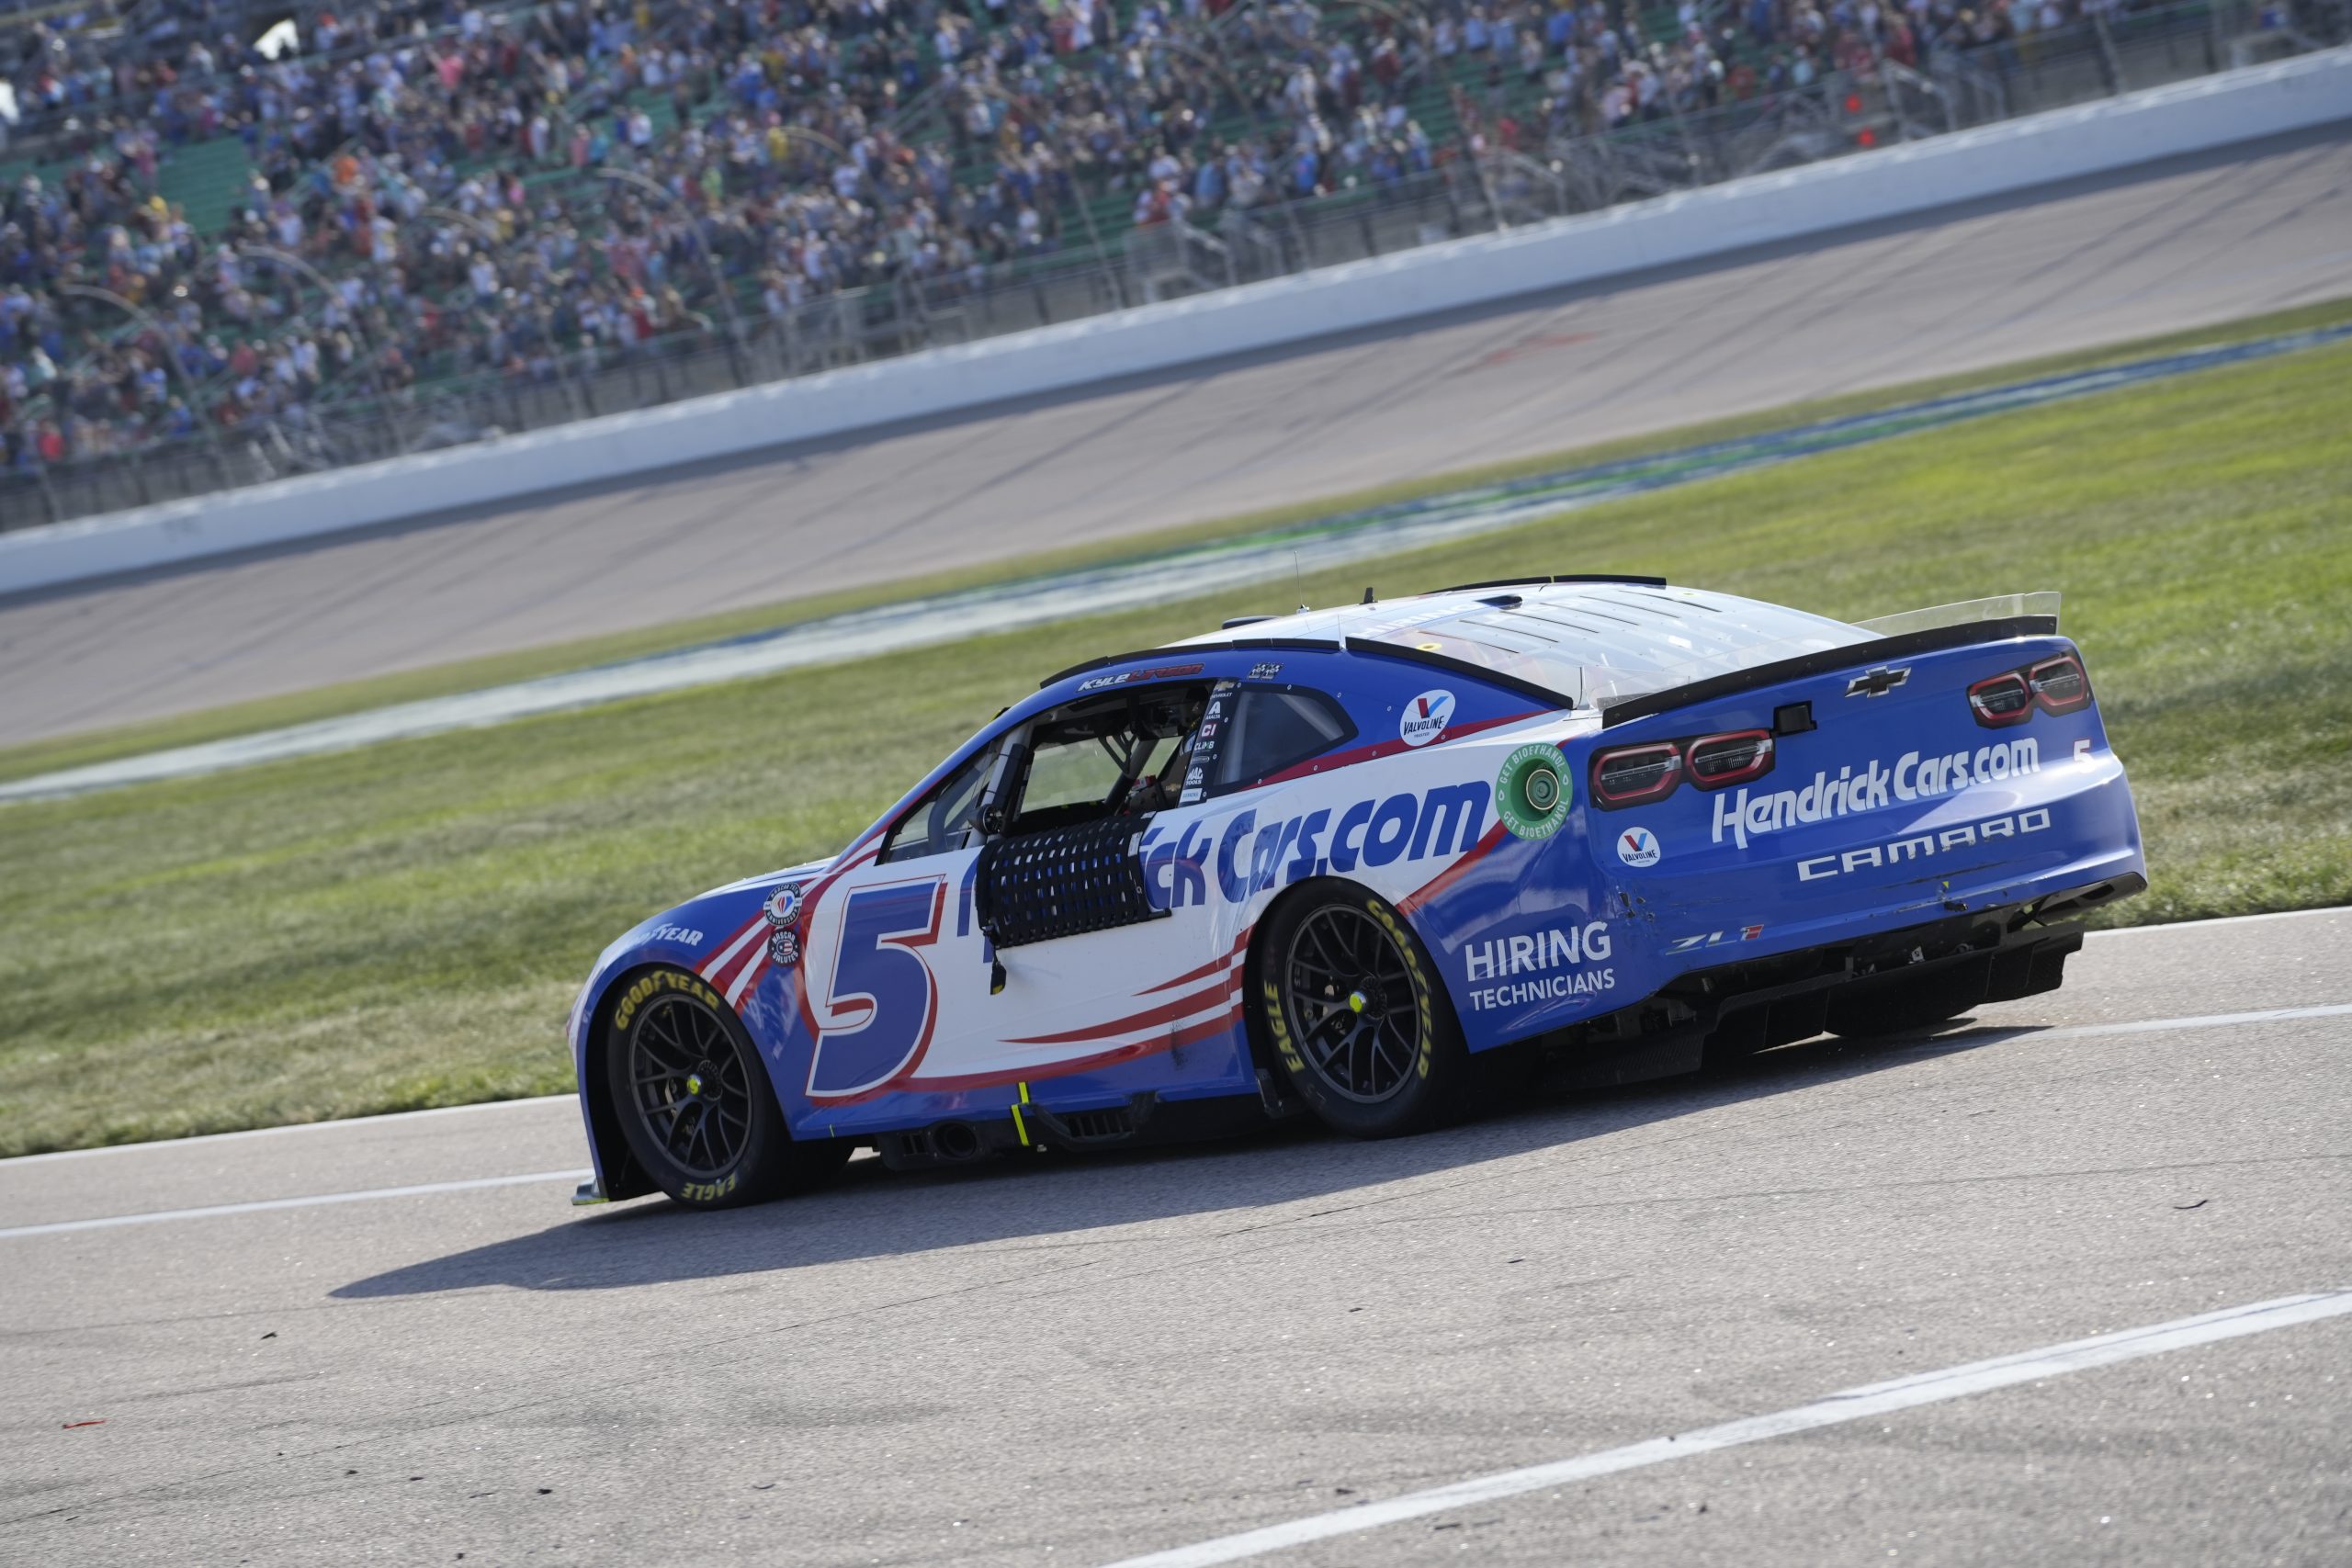 It is another bridesmaid finish for Larson and company at Kansas. (Photo: Christopher Vargas | The Podium Finish)